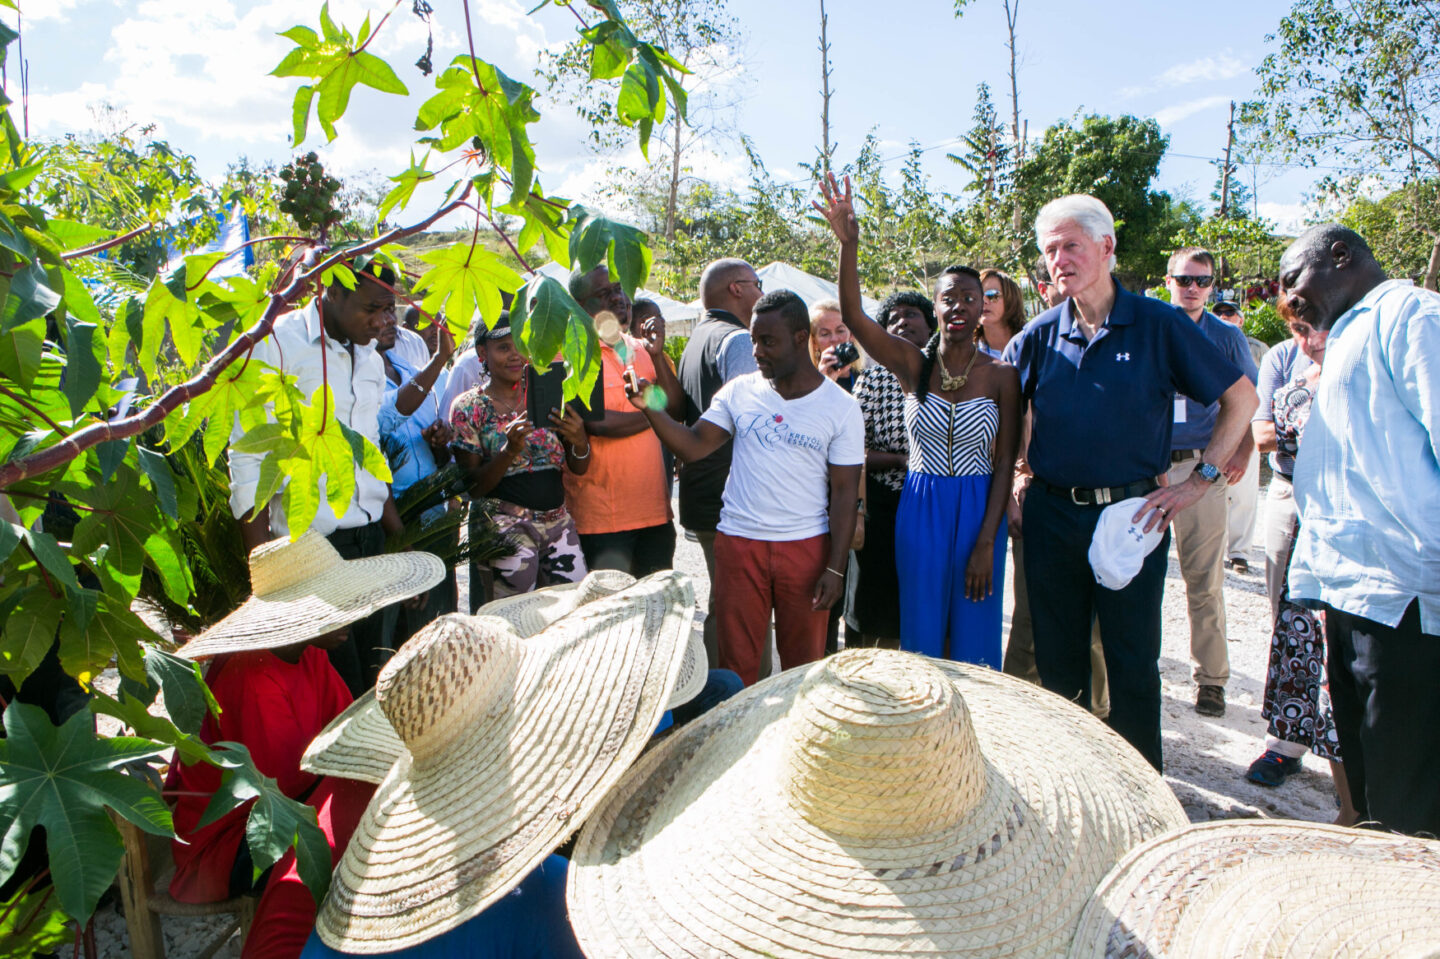 President Clinton and a group of individuals observe a tree